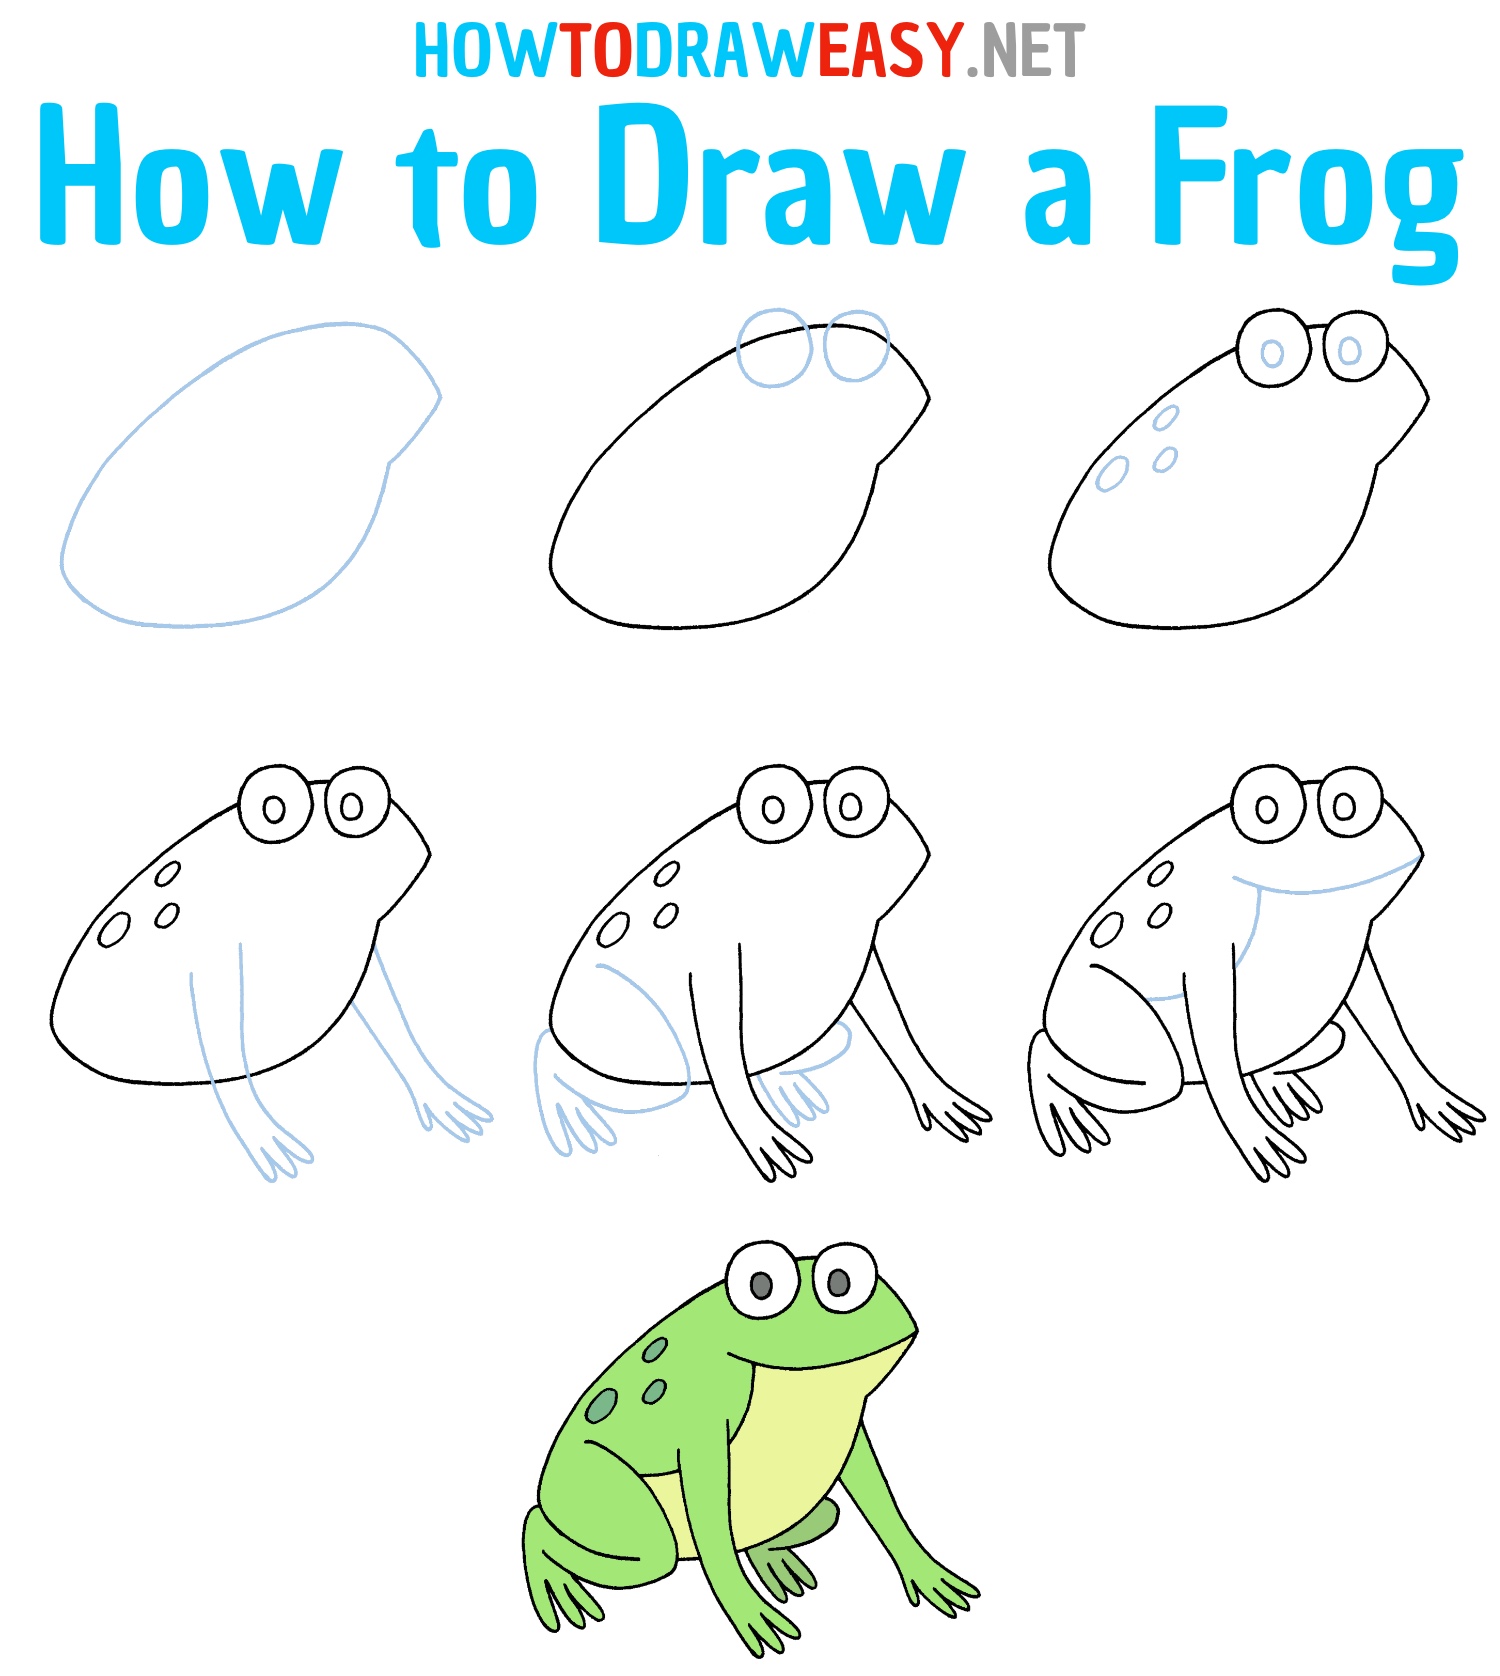 How to Draw a Frog Step by Step